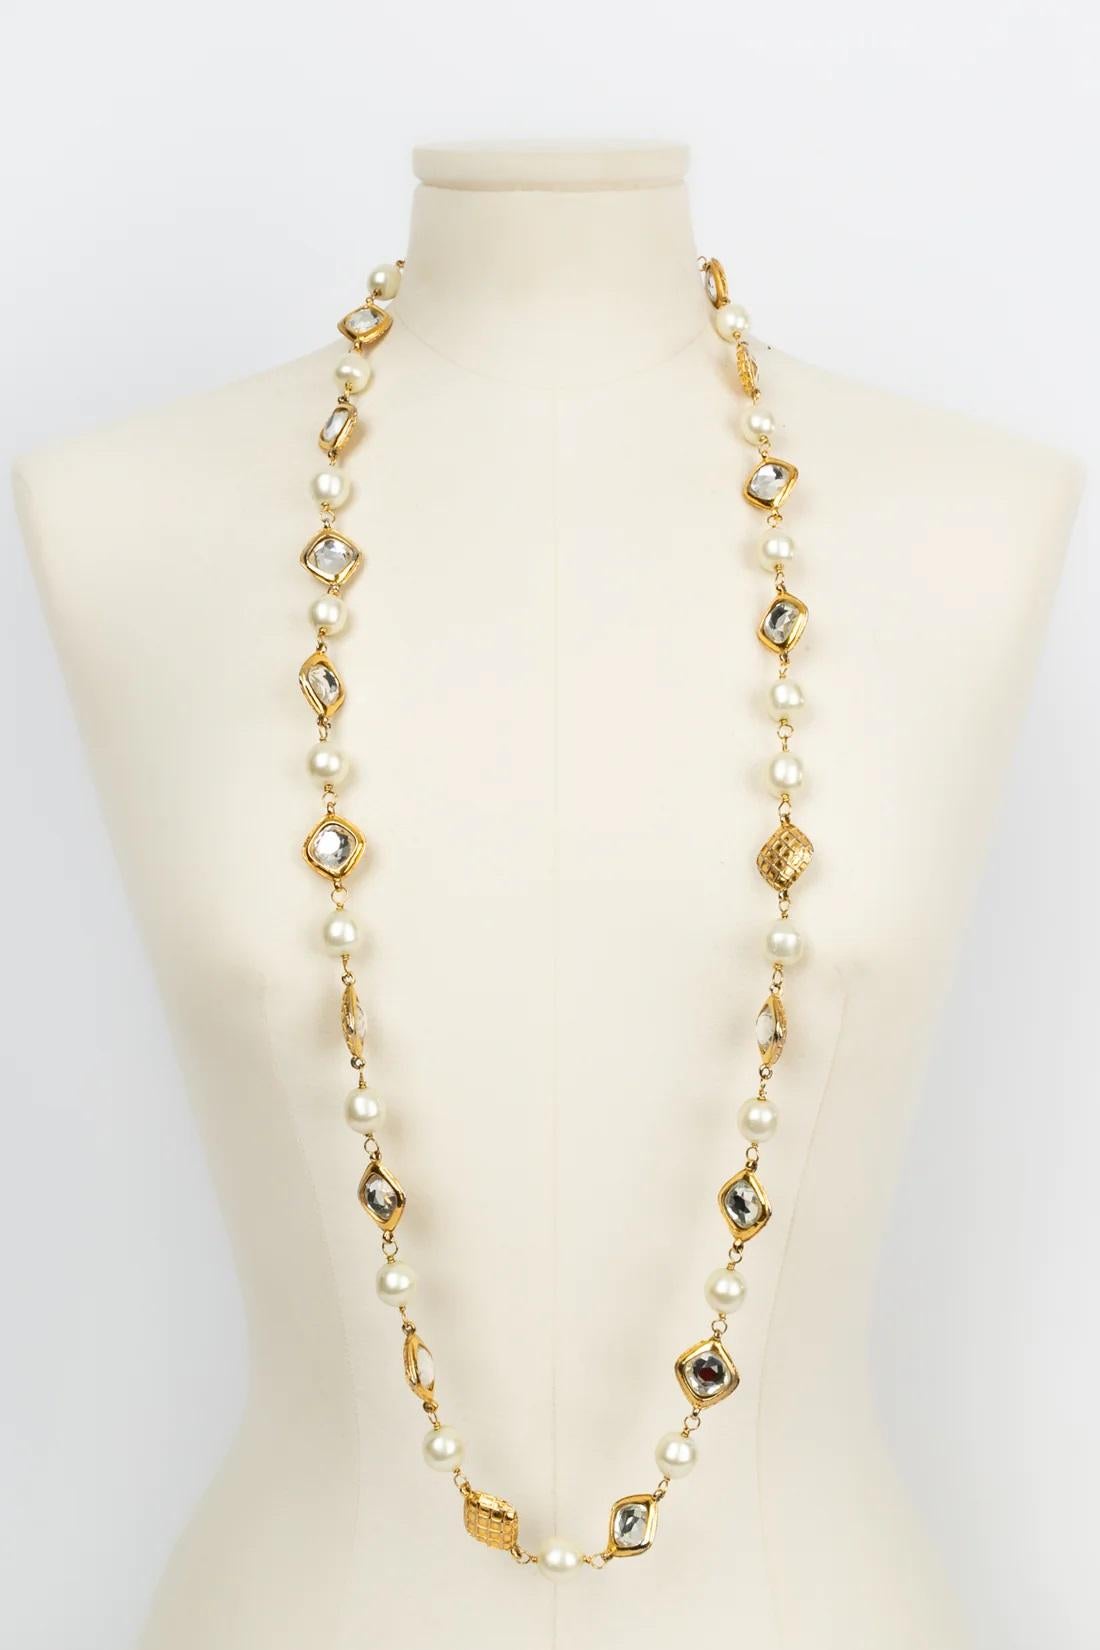 Chanel Beads and Rhinestones Necklace and Clip-on Earrings Set 10